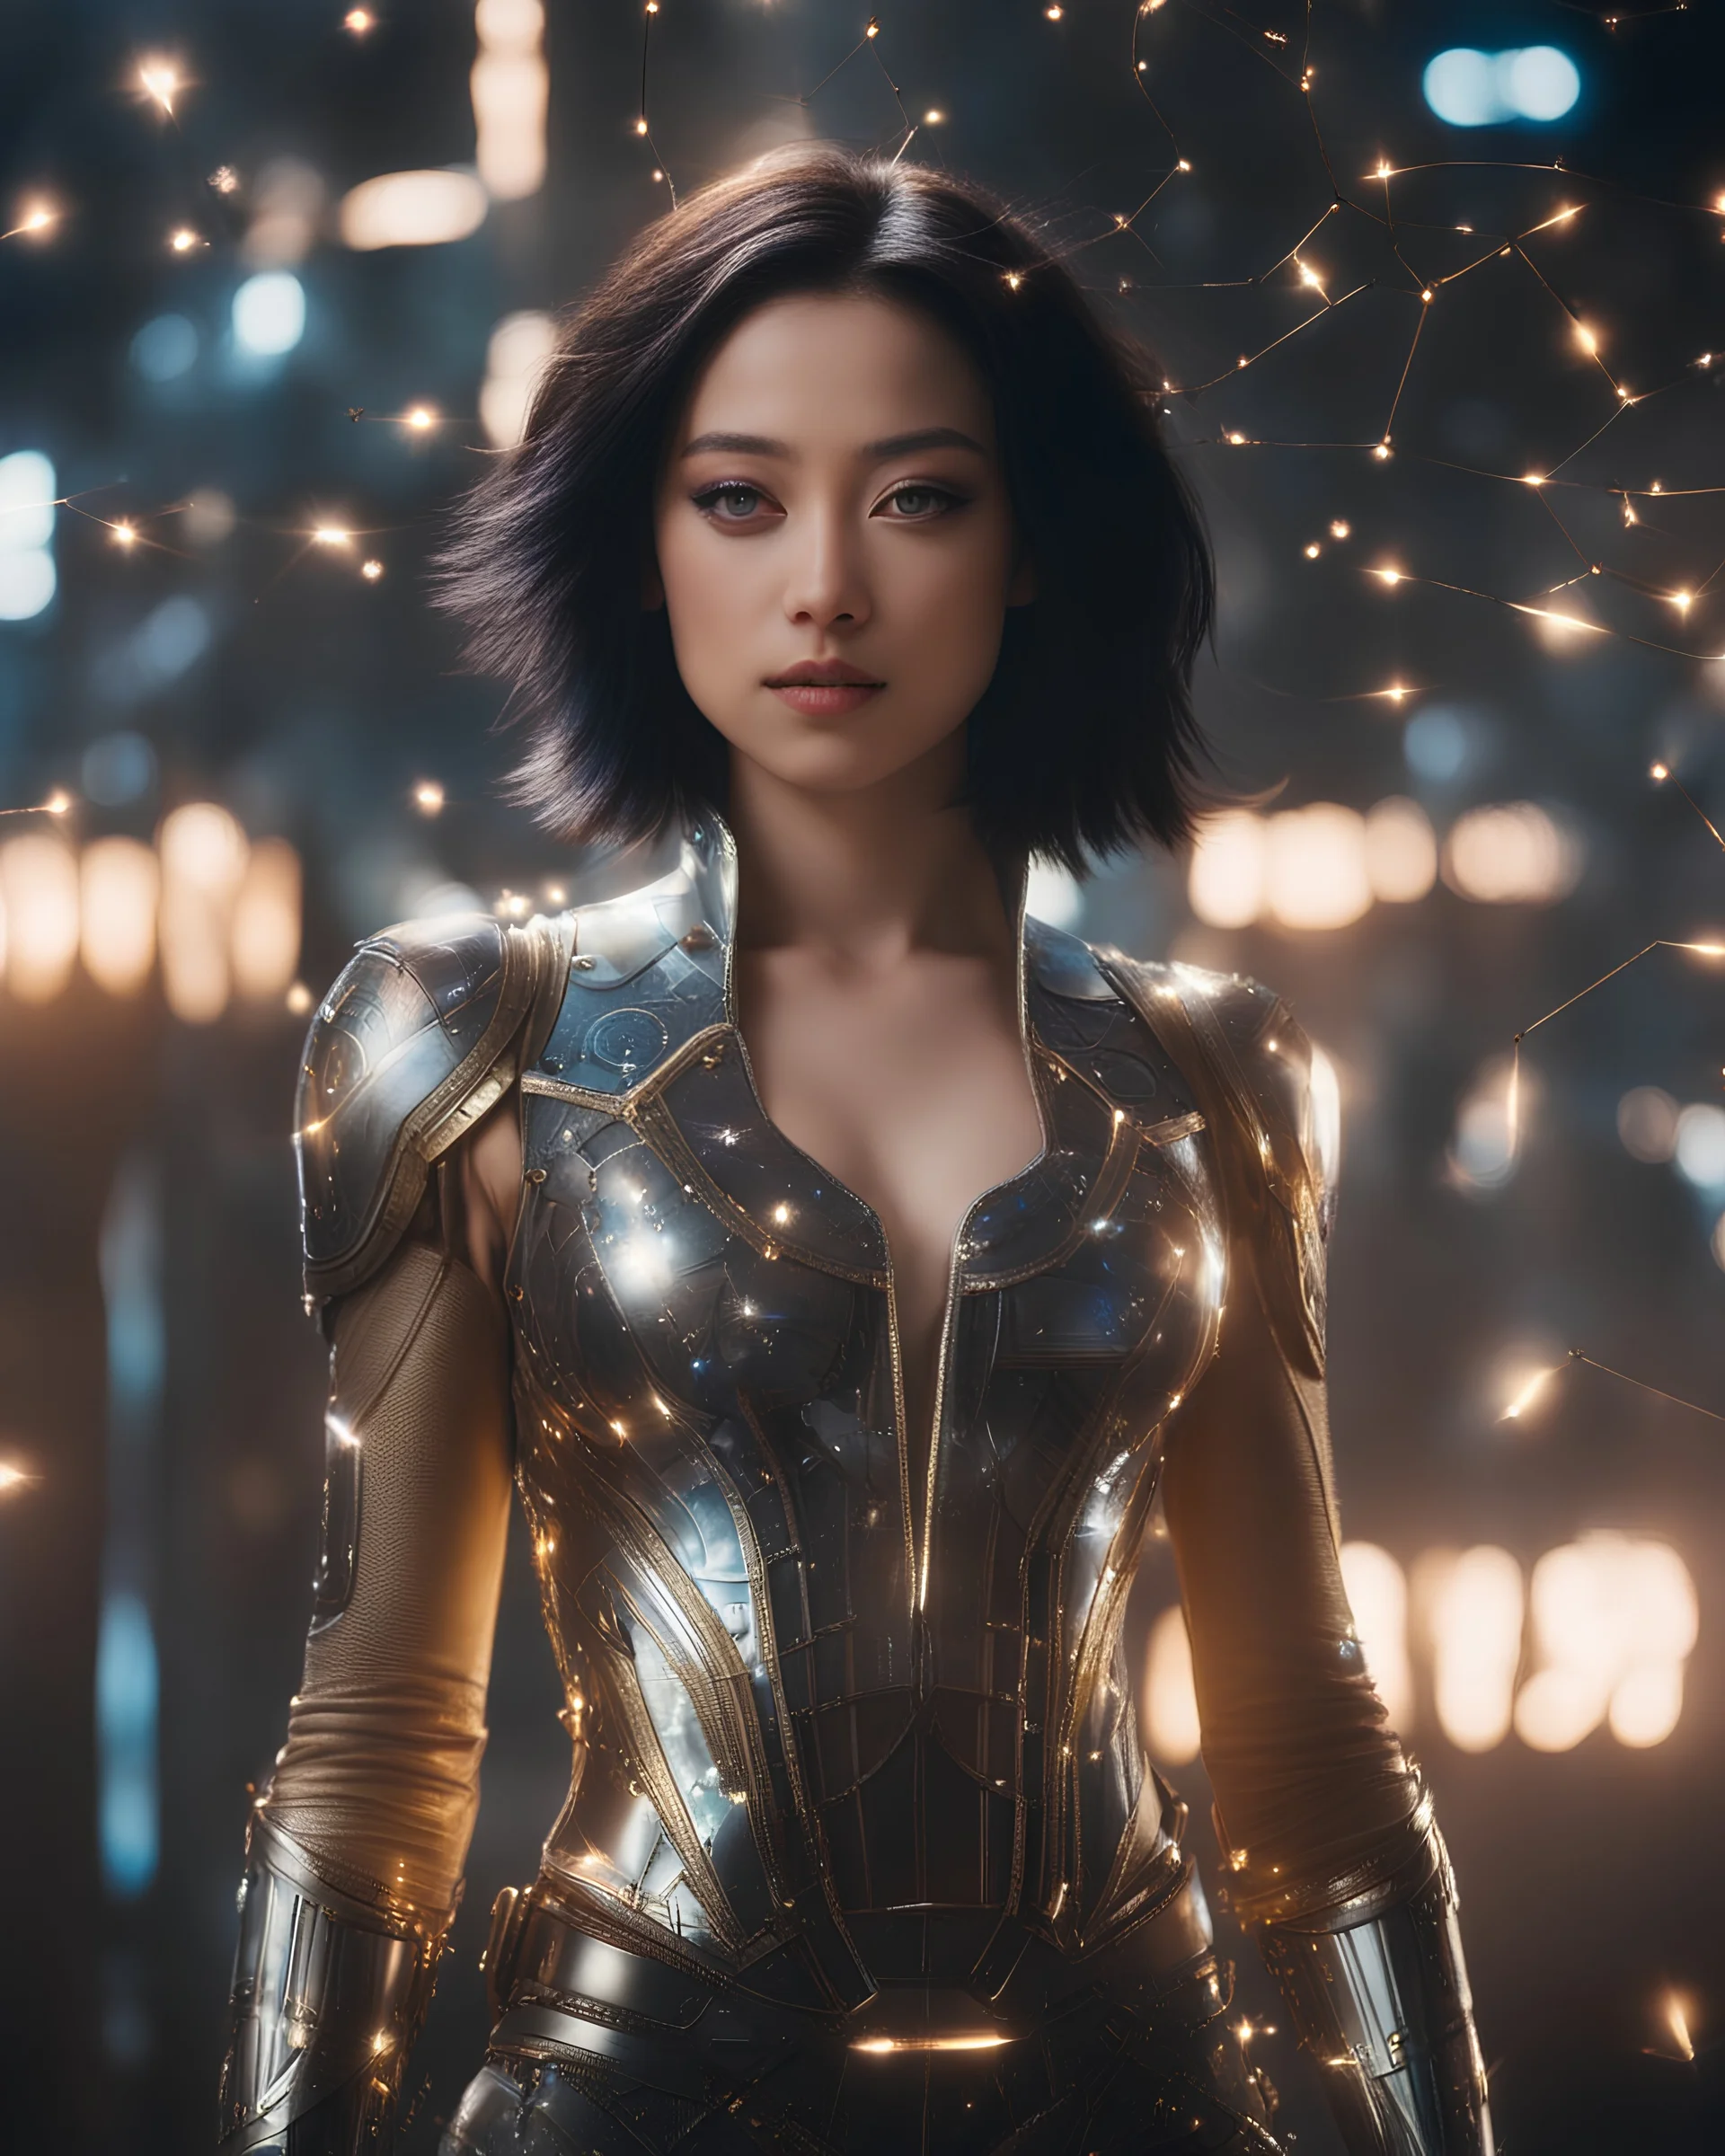 /dream prompt:Joyful (photograph:1.2) of Alita from Battle Angel, her (cybernetic body:1.3) adorned with (glistening crystals:1.25) and (glowing electric circuits:1.3), bathed in (radiant light:1.2), shot with a (macro lens:1.3) for exquisite detail